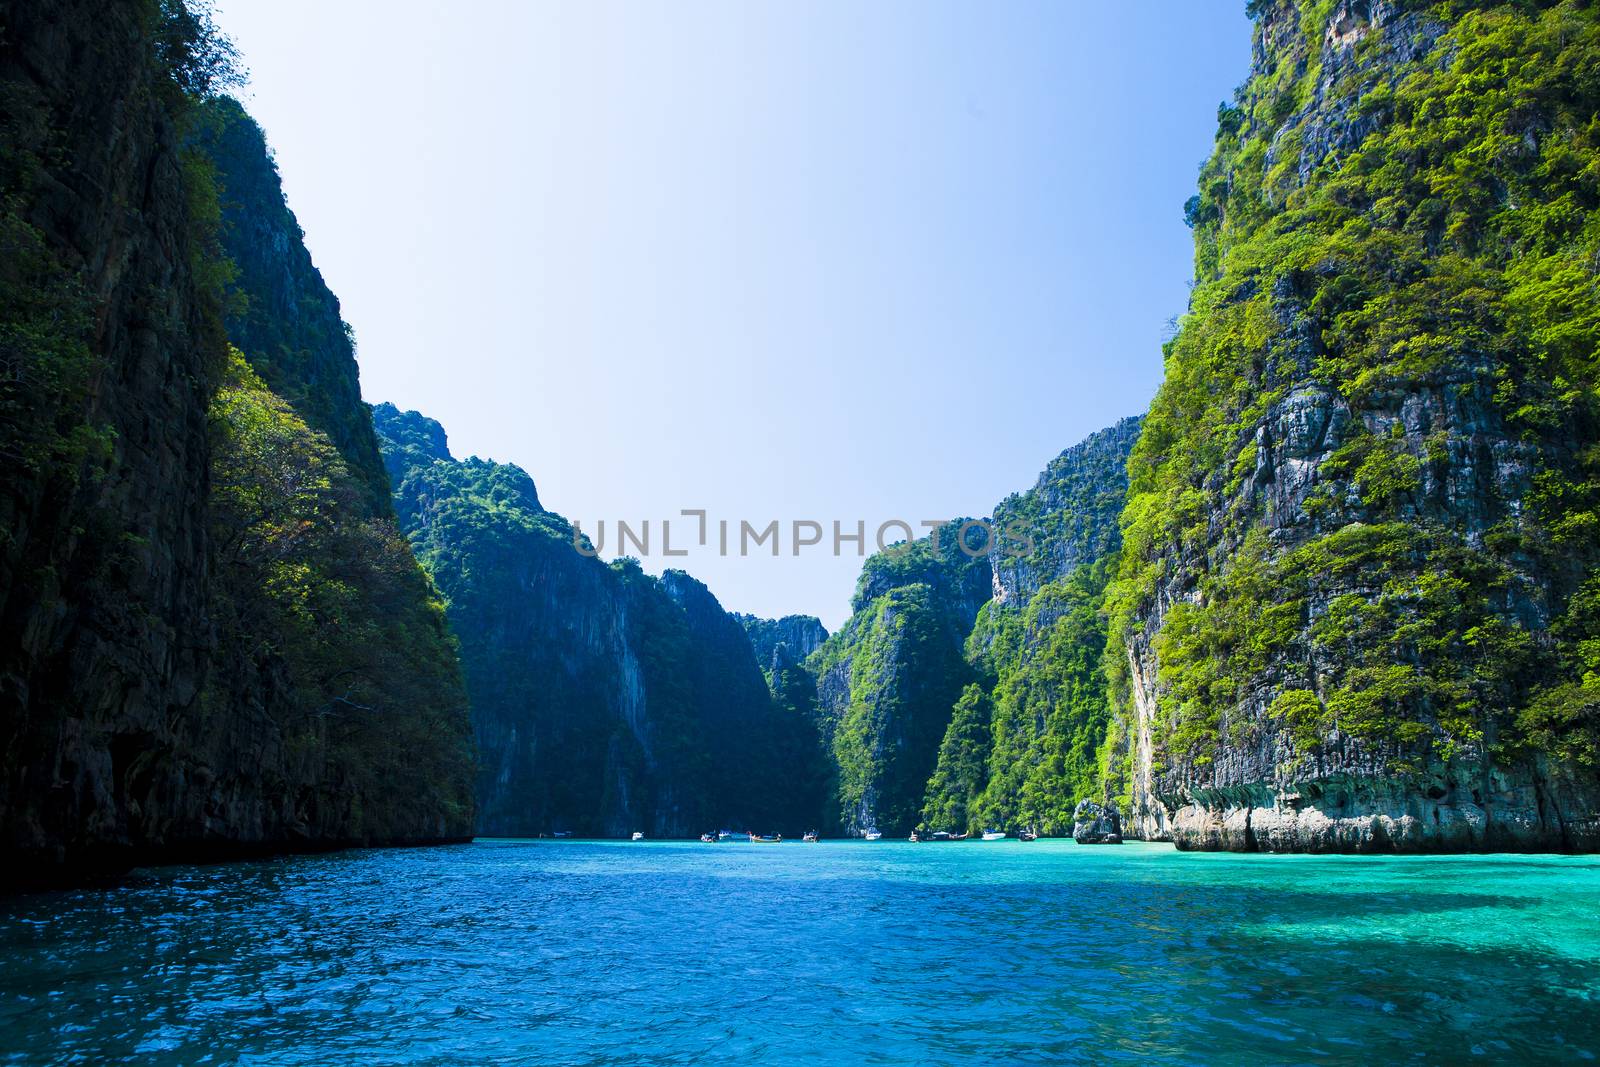 Thailand beach seascape with ring of steep limestone hills and traditional bright longtail boats parking, Maya Bay, Ko Phi Phi Lee island, Phi Phi archipelago, part of Krabi Province, Andaman Sea